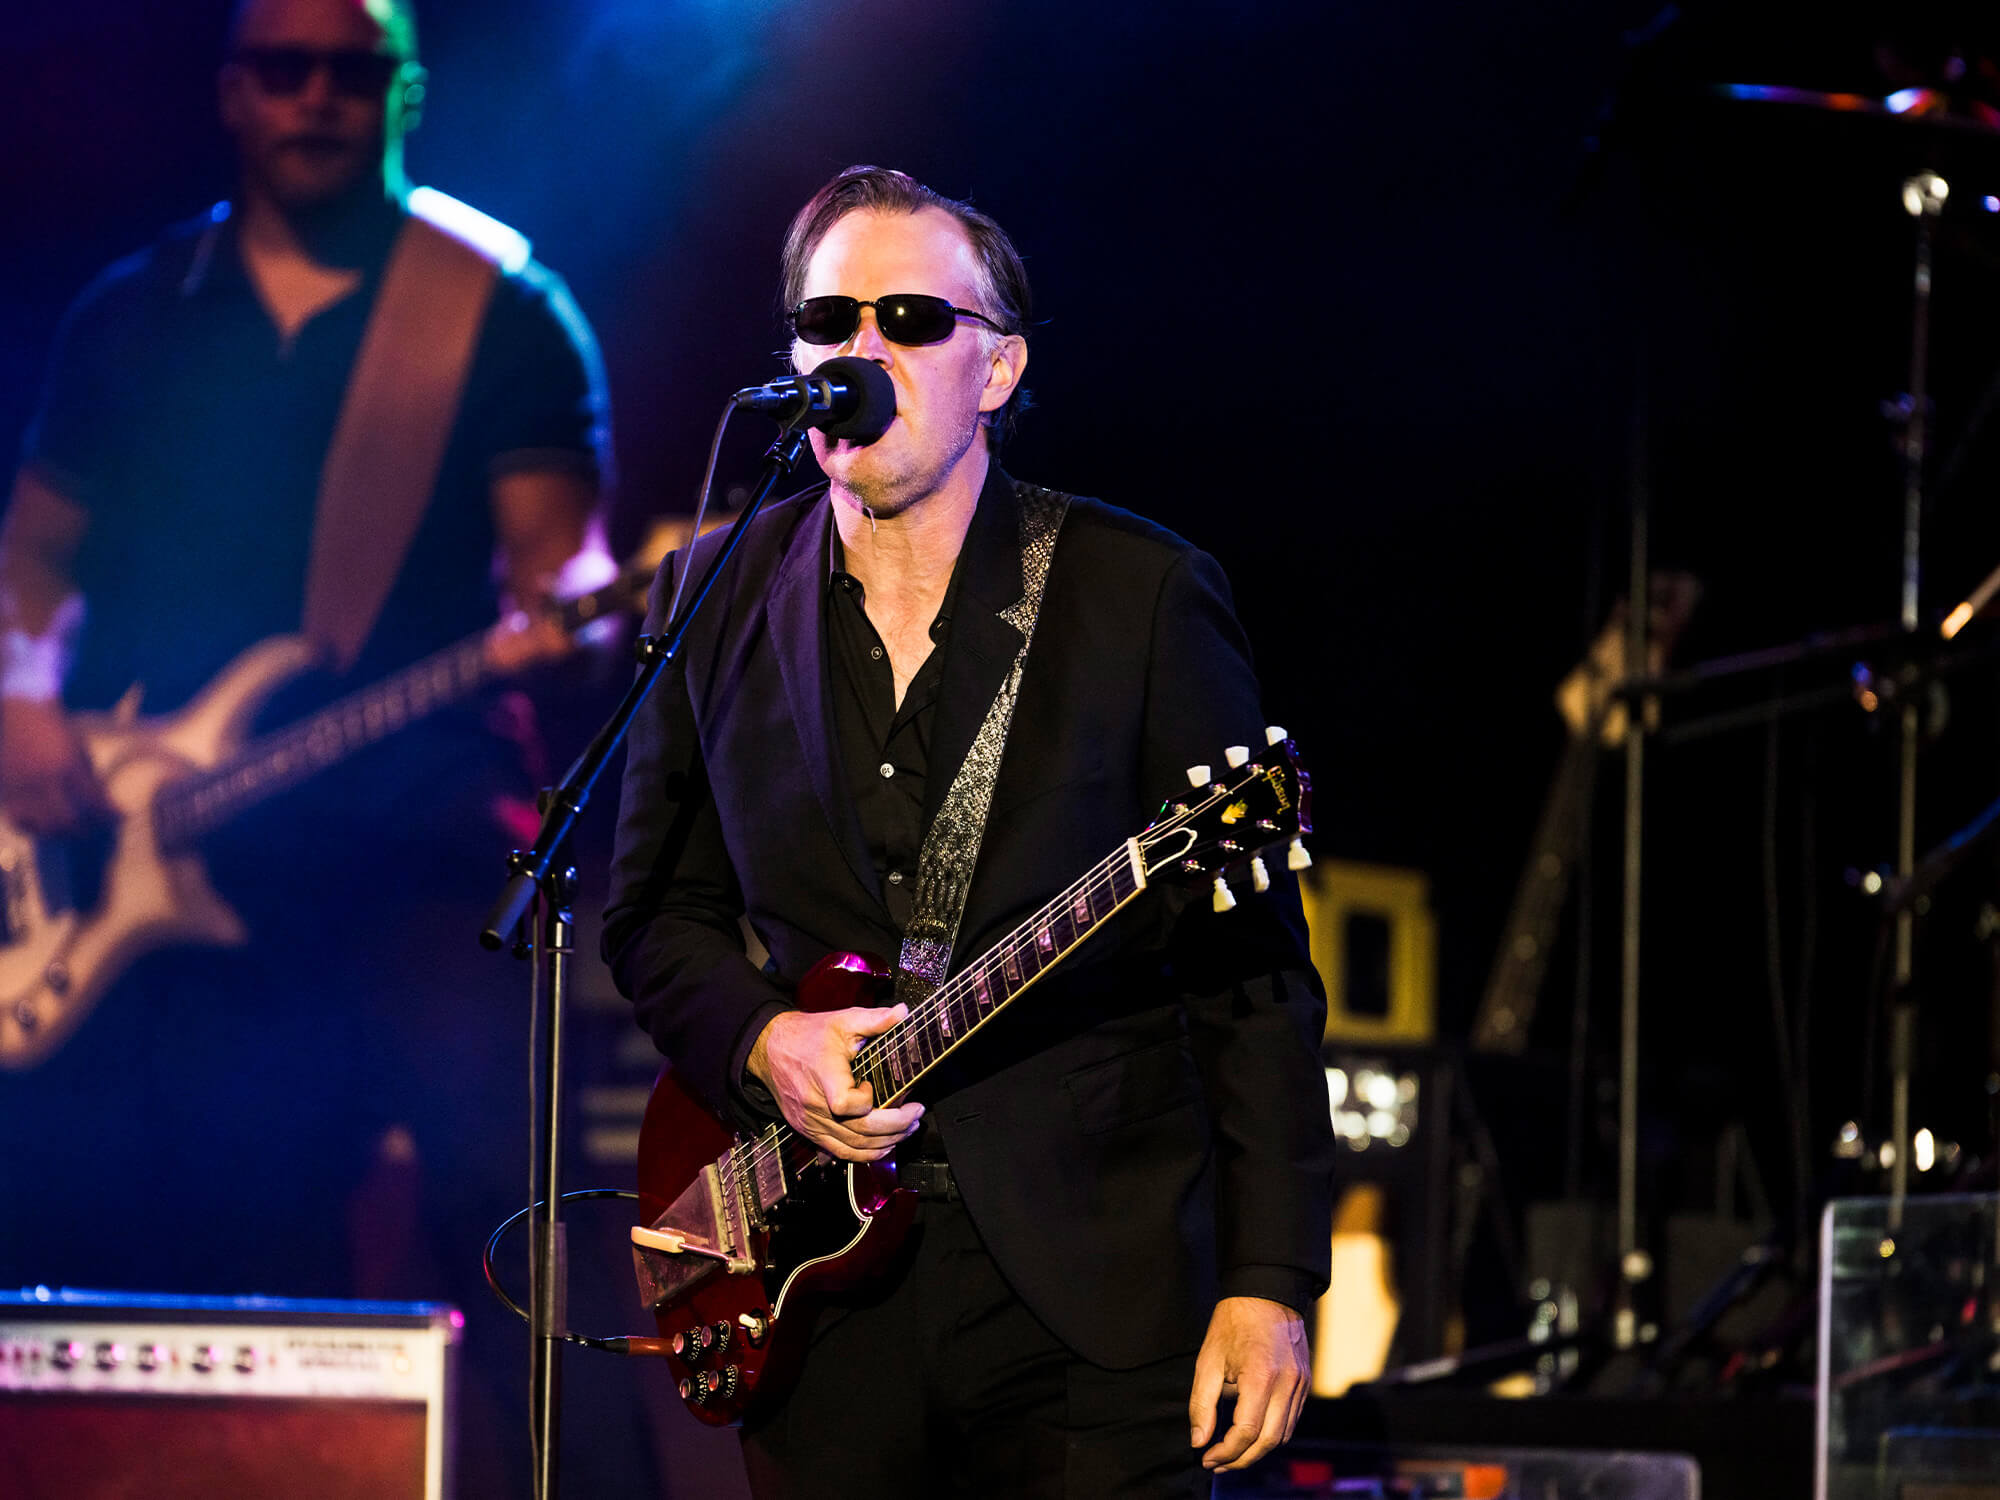 Joe Bonamassa in his classic sunglasses, holding the neck of a guitar as he is singing into a mic